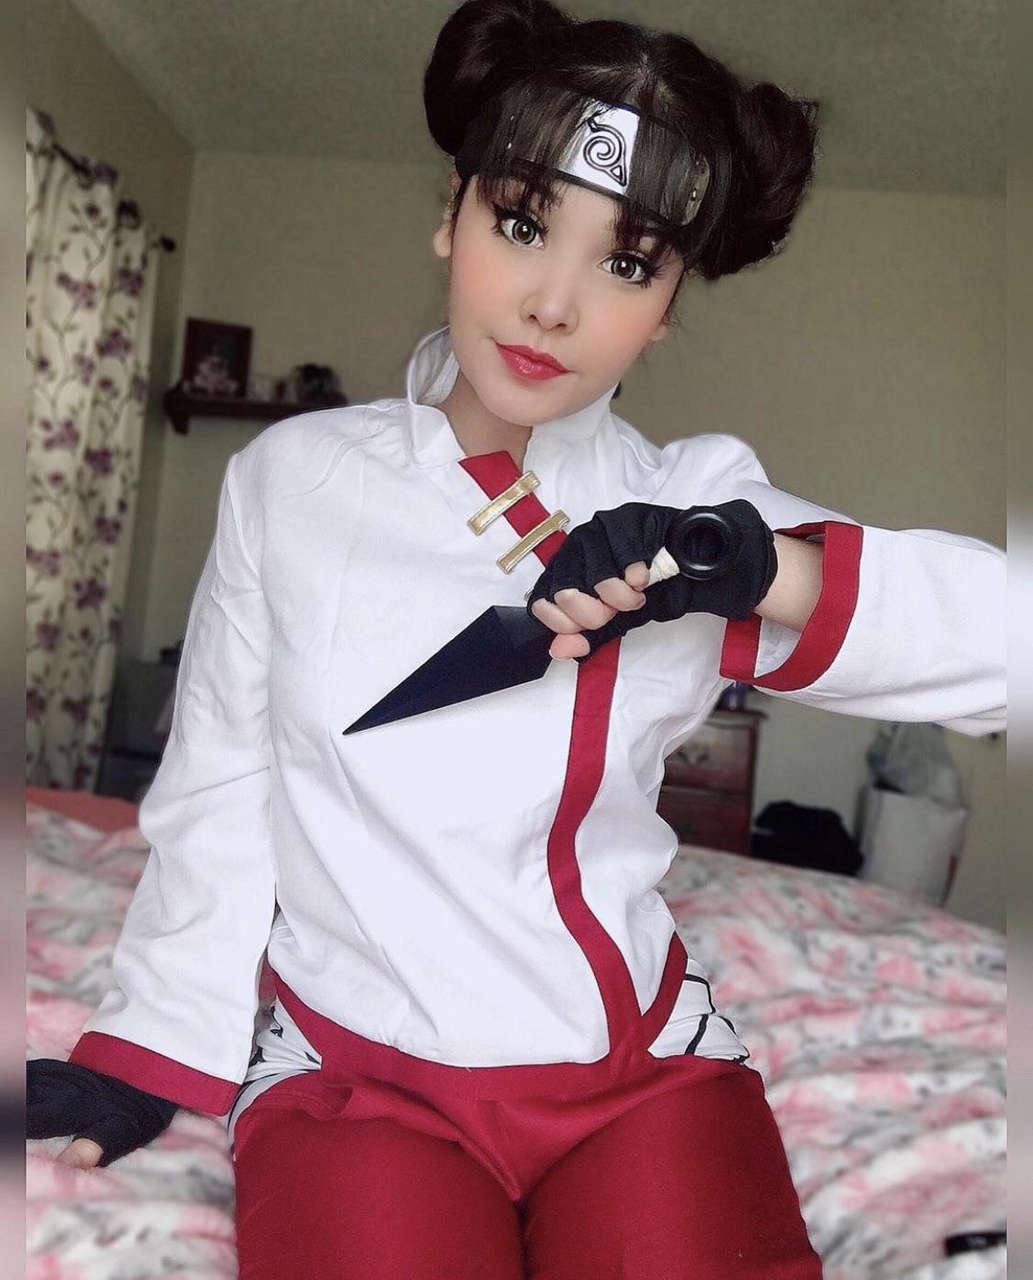 Tenten From Naruto By Chibikat